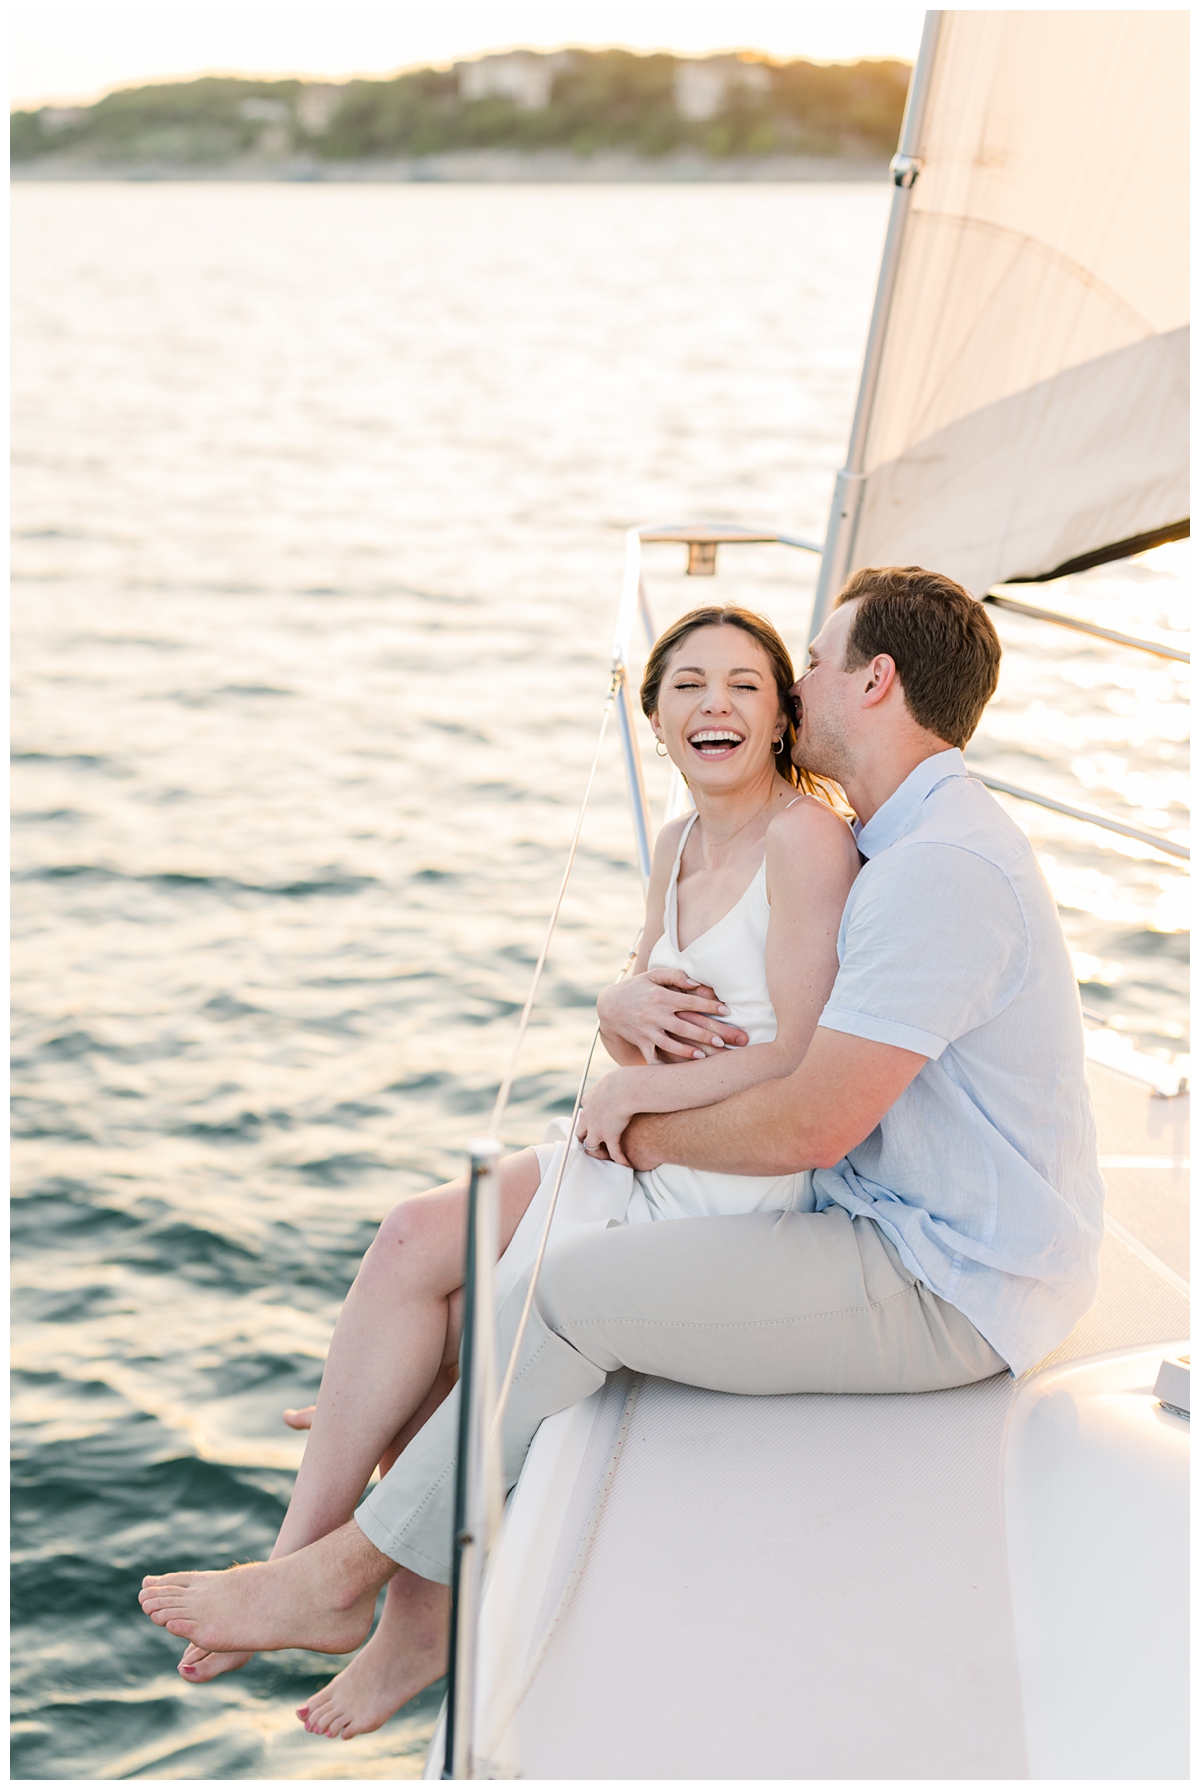 Engagement Photos on a Sailboat